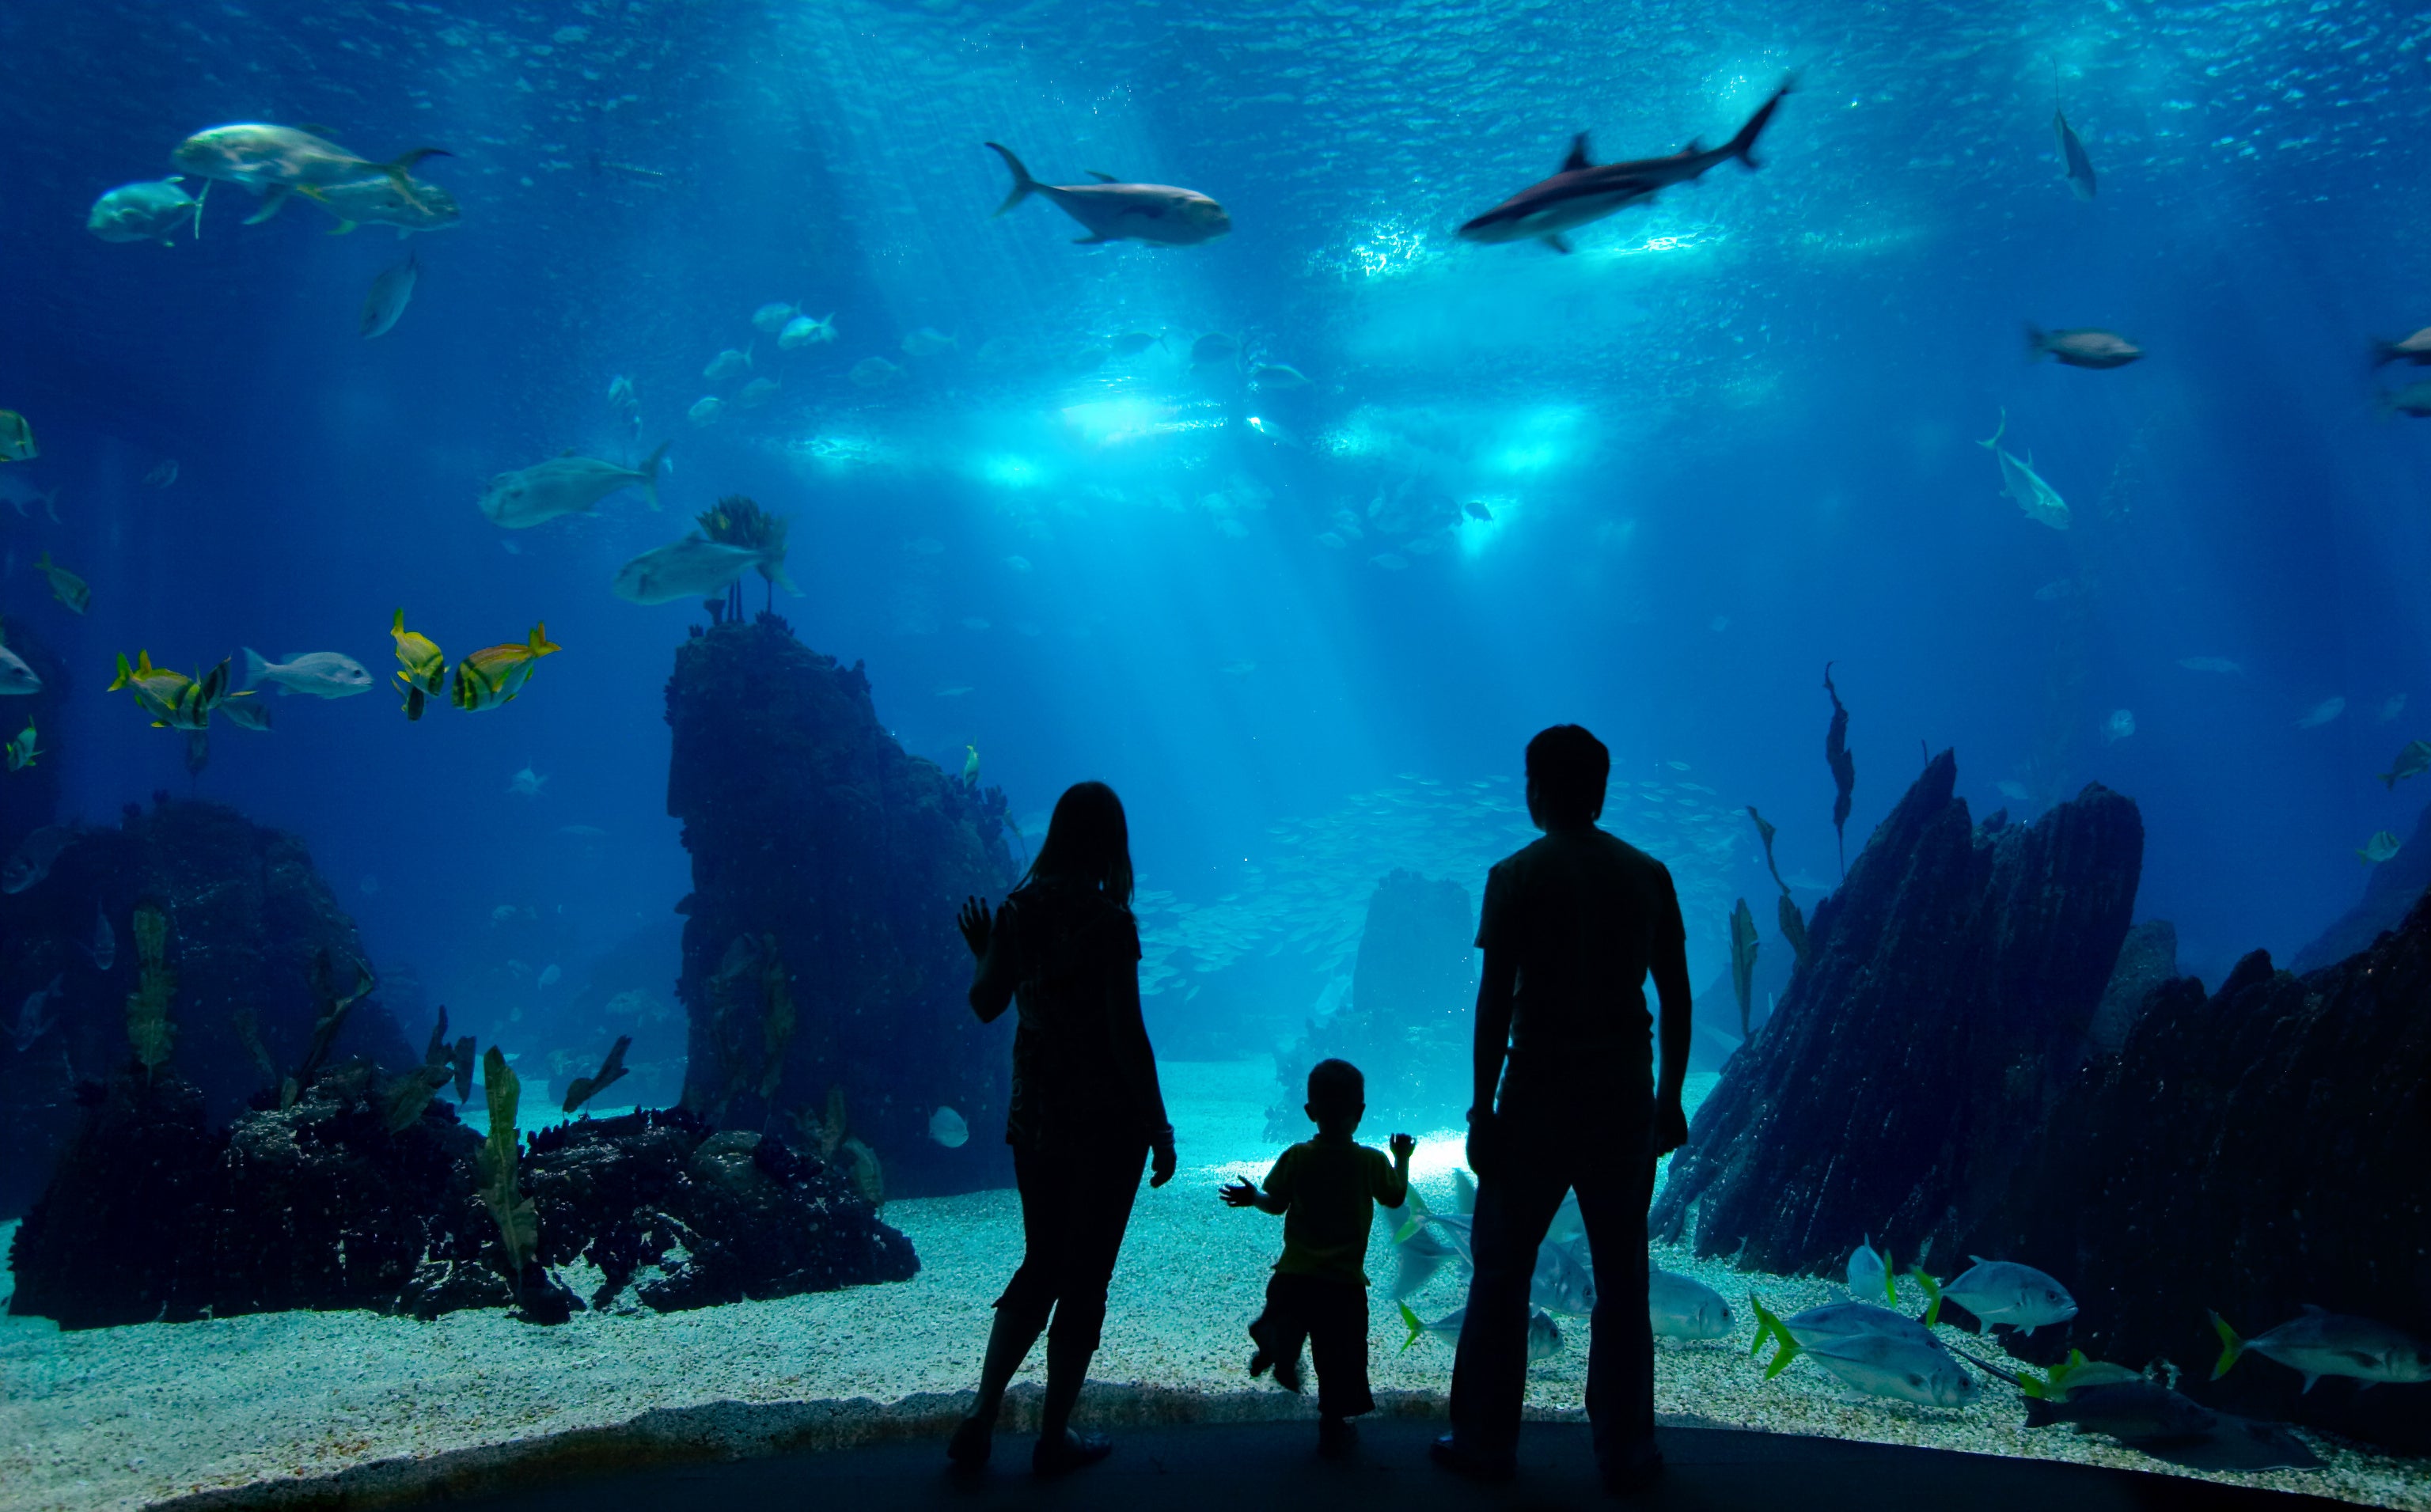 Family of three silhouettes looking through the glass of an aquarium